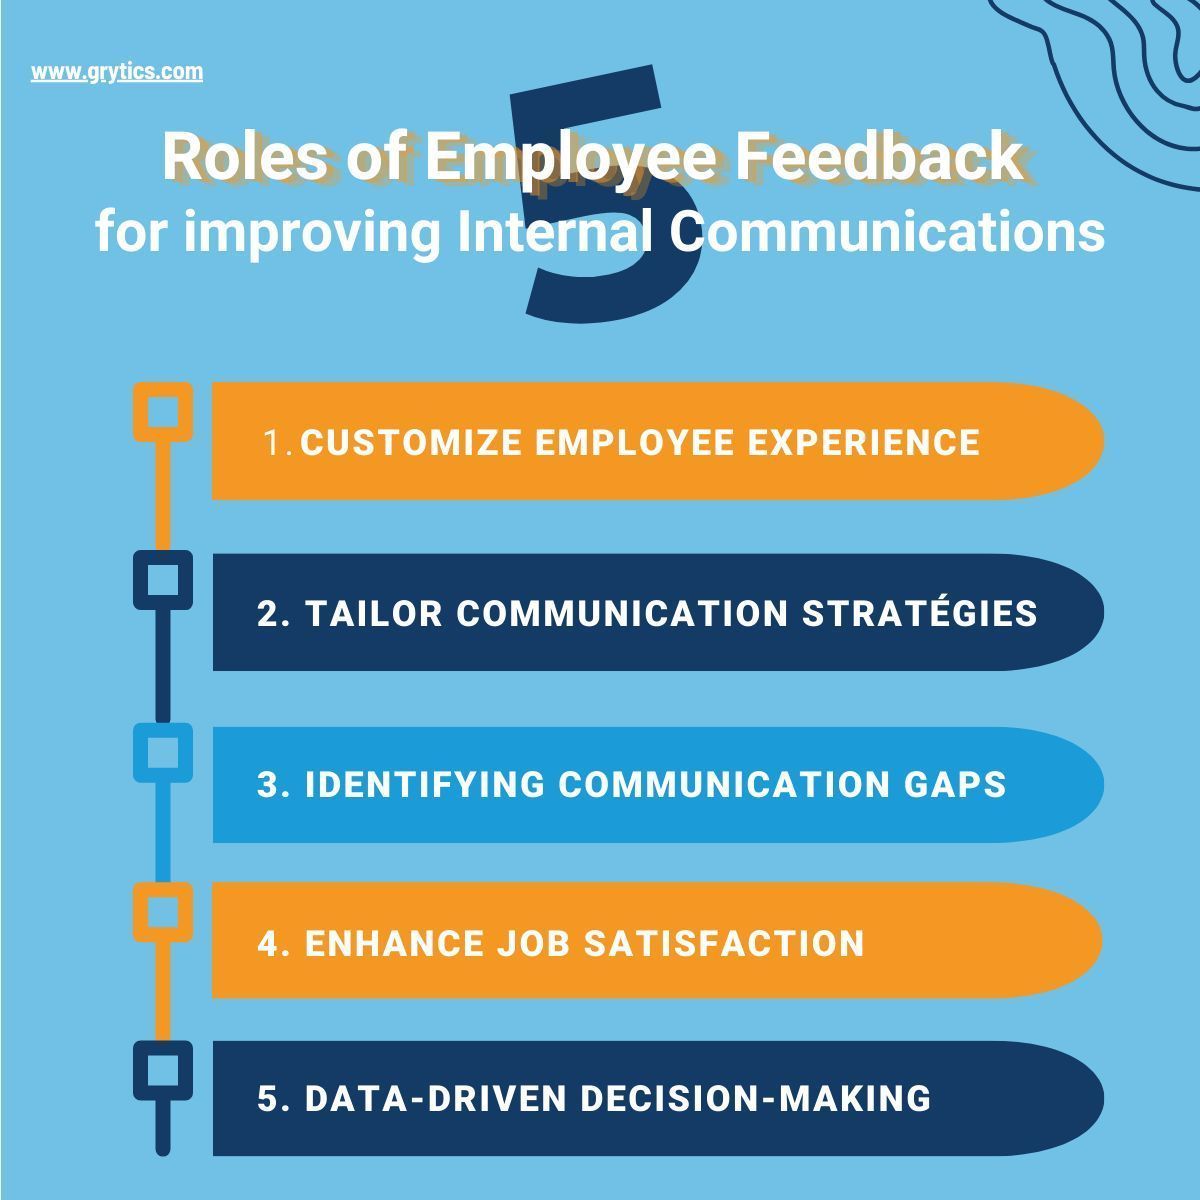 Companies are realizing more and more how important it is to listen to what employees think. Asking for #feedback and doing surveys isn't just a routine; it's a crucial strategy. It helps create a culture of always getting better and growing steadily.#Workplace #InternalComms #HR